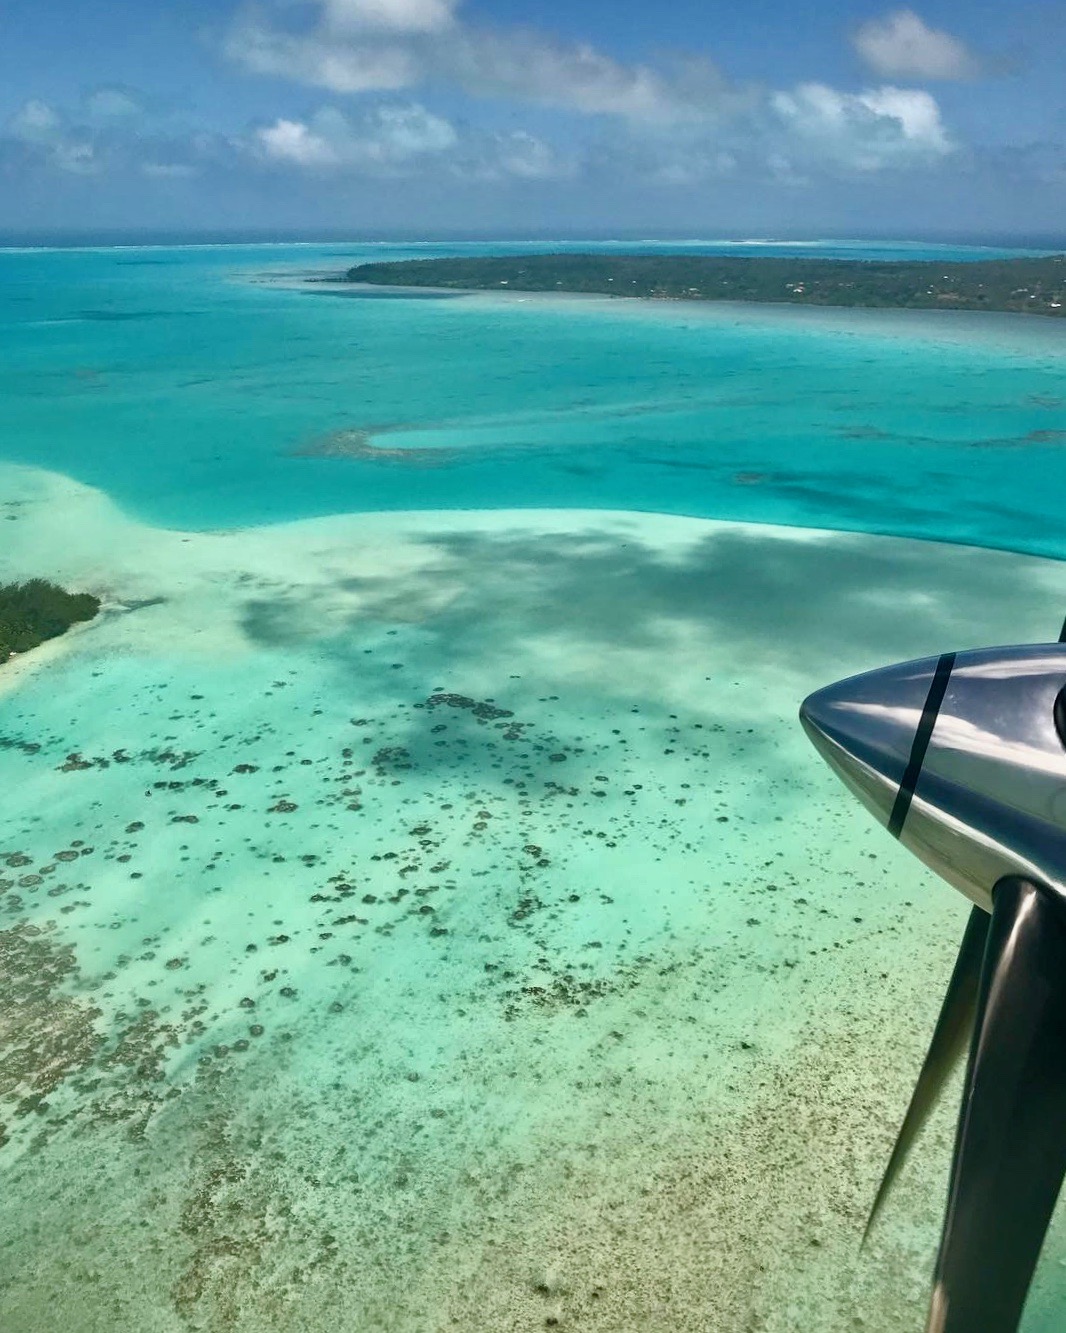 The view from a plane of a crystal clear blue lagoon